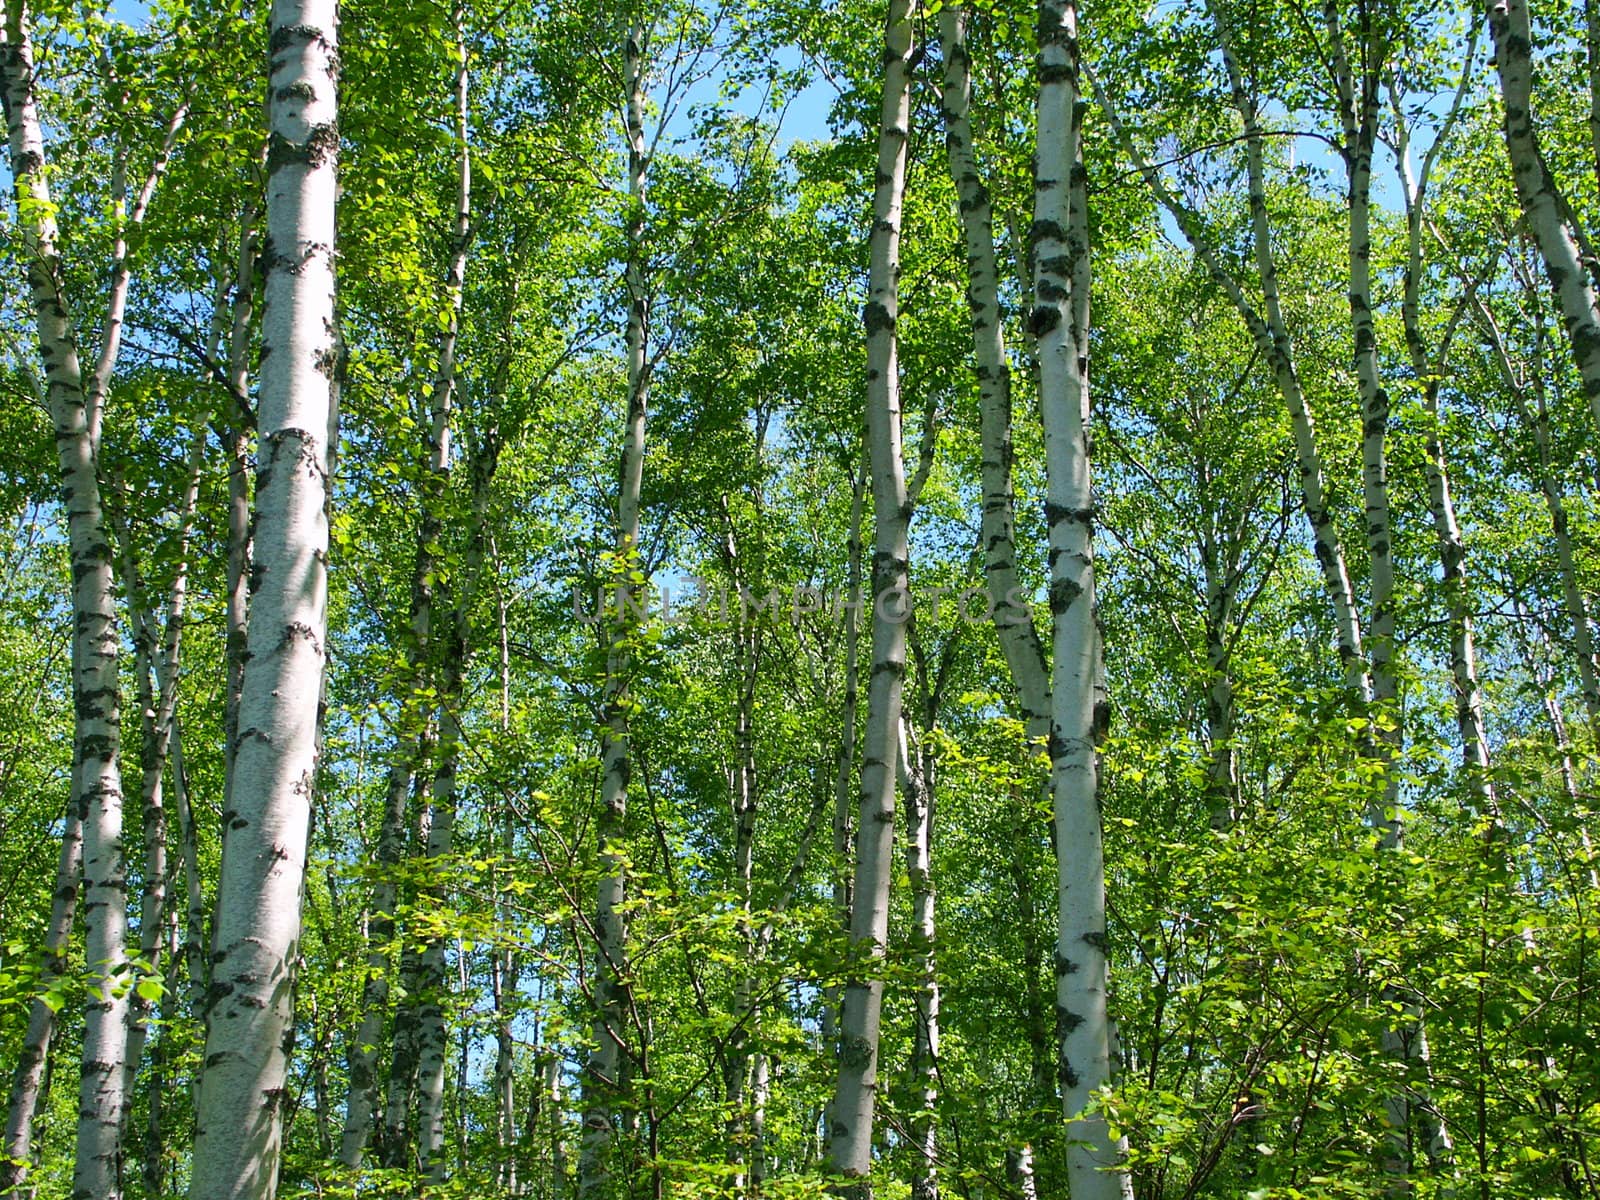 A dense stand of aspen trees at the Apostle Islands National Lakeshore in northern Wisconsin.